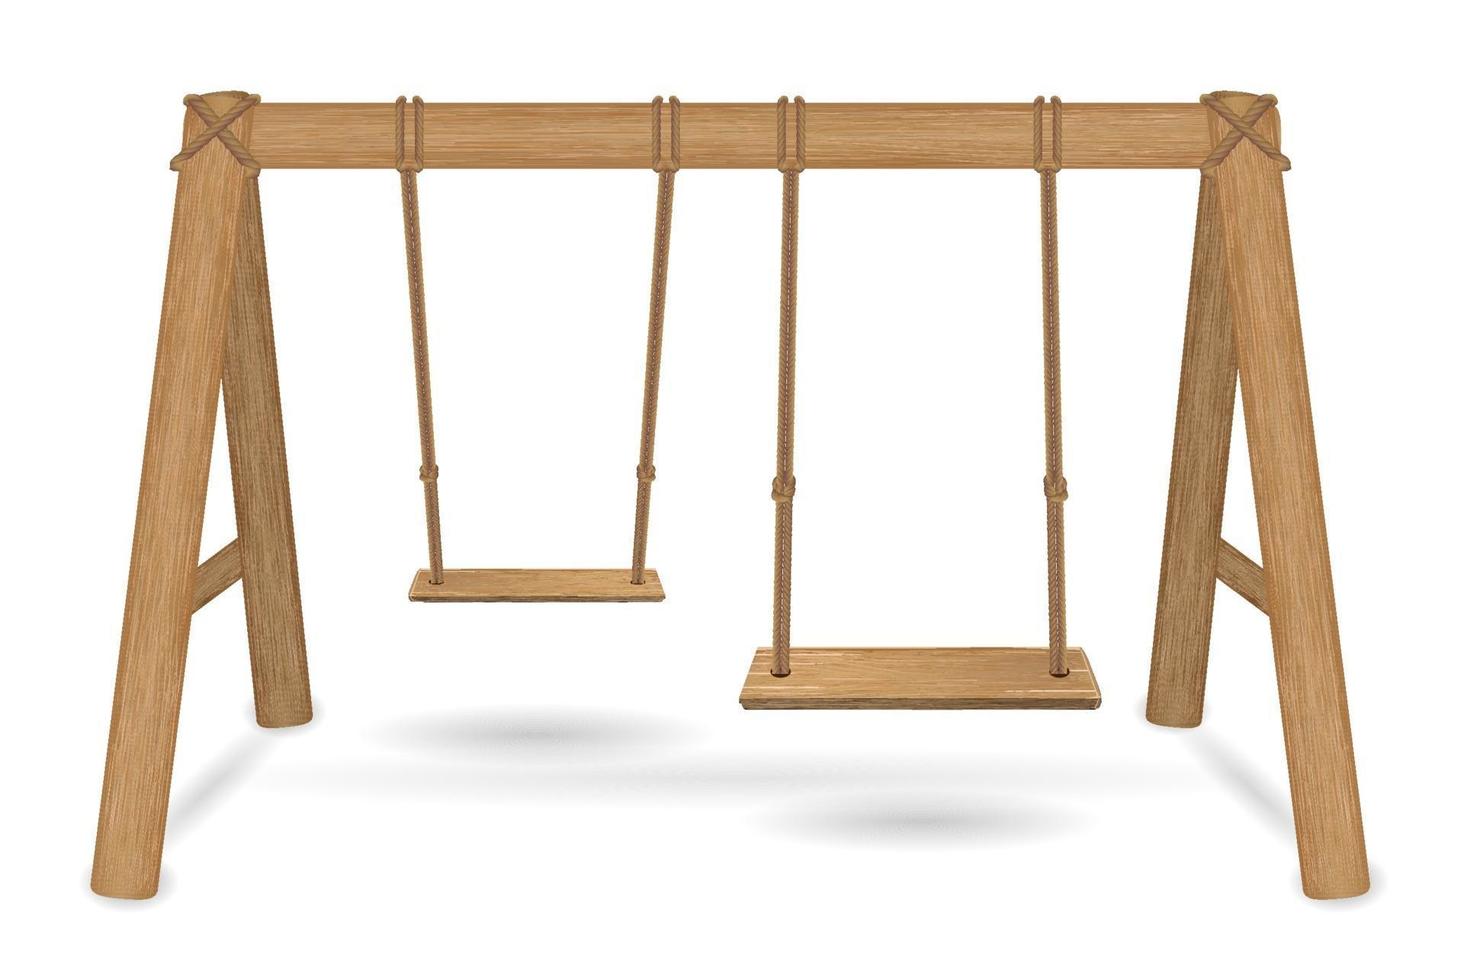 wooden swing vector on a white background